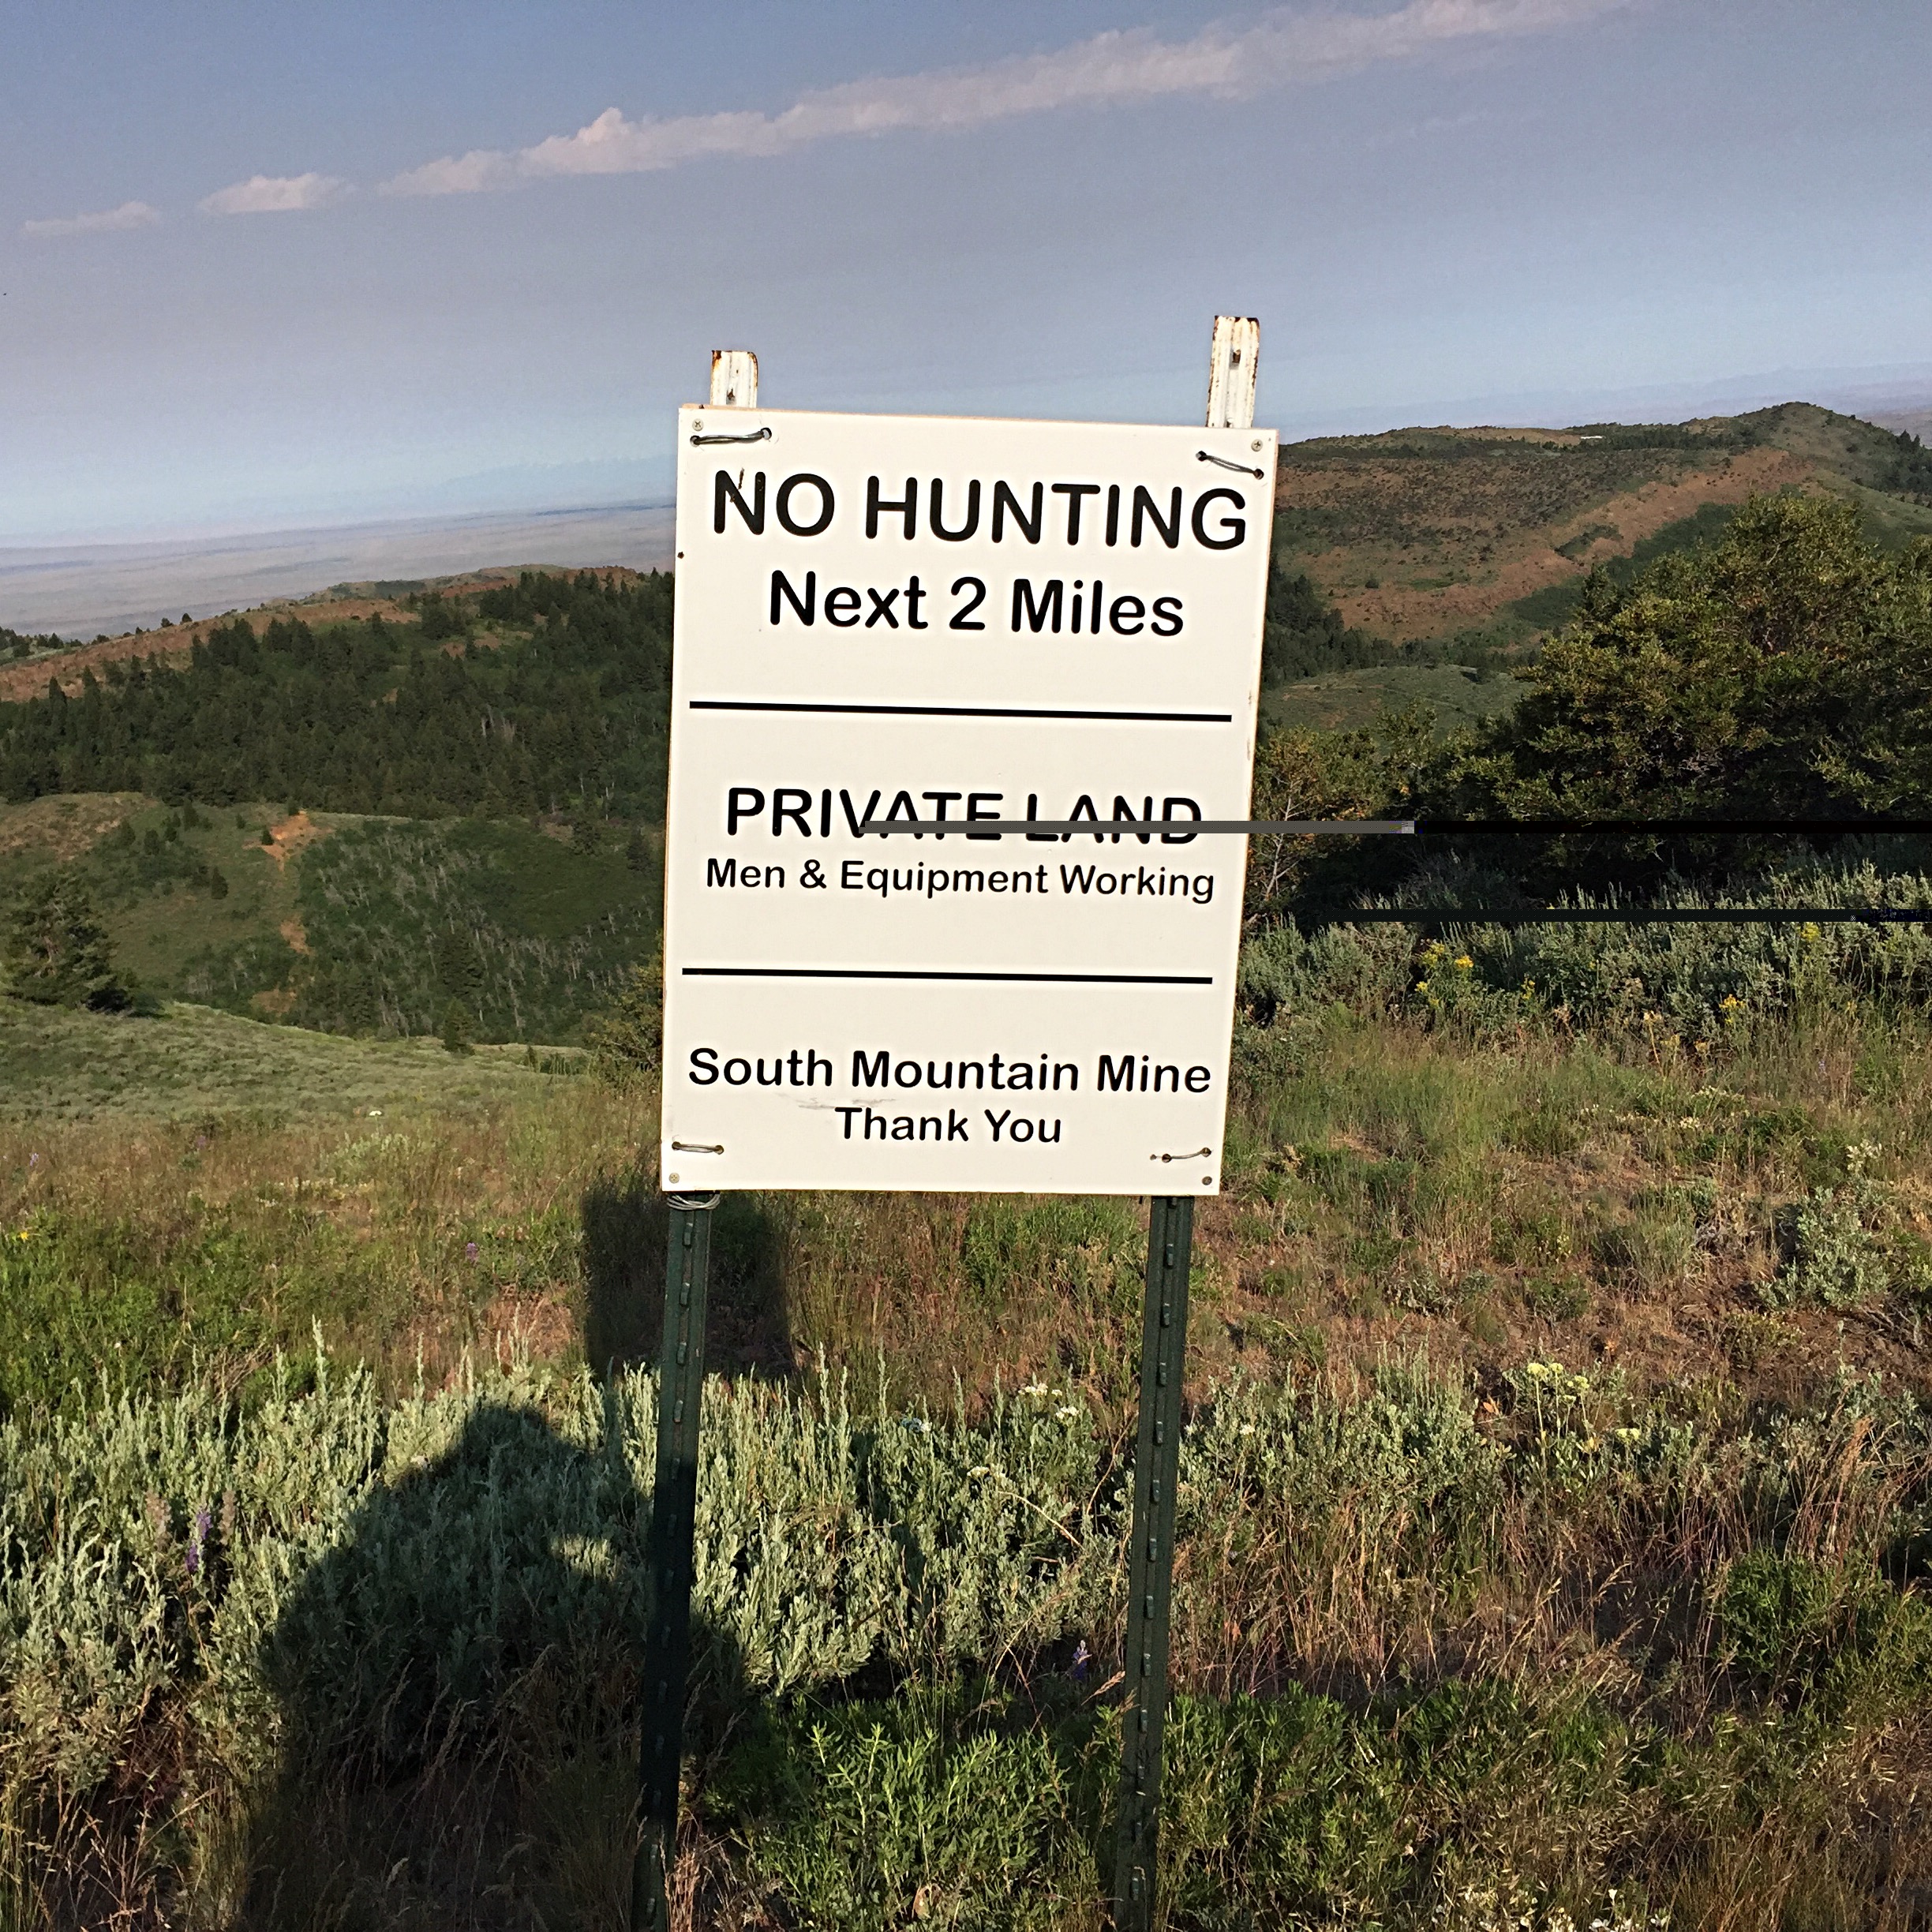 Please help preserve public access onmthe South Mountain Road by staying on the road and obeying the signs' directions. Stay on the road and leave cabins an equipment alone.